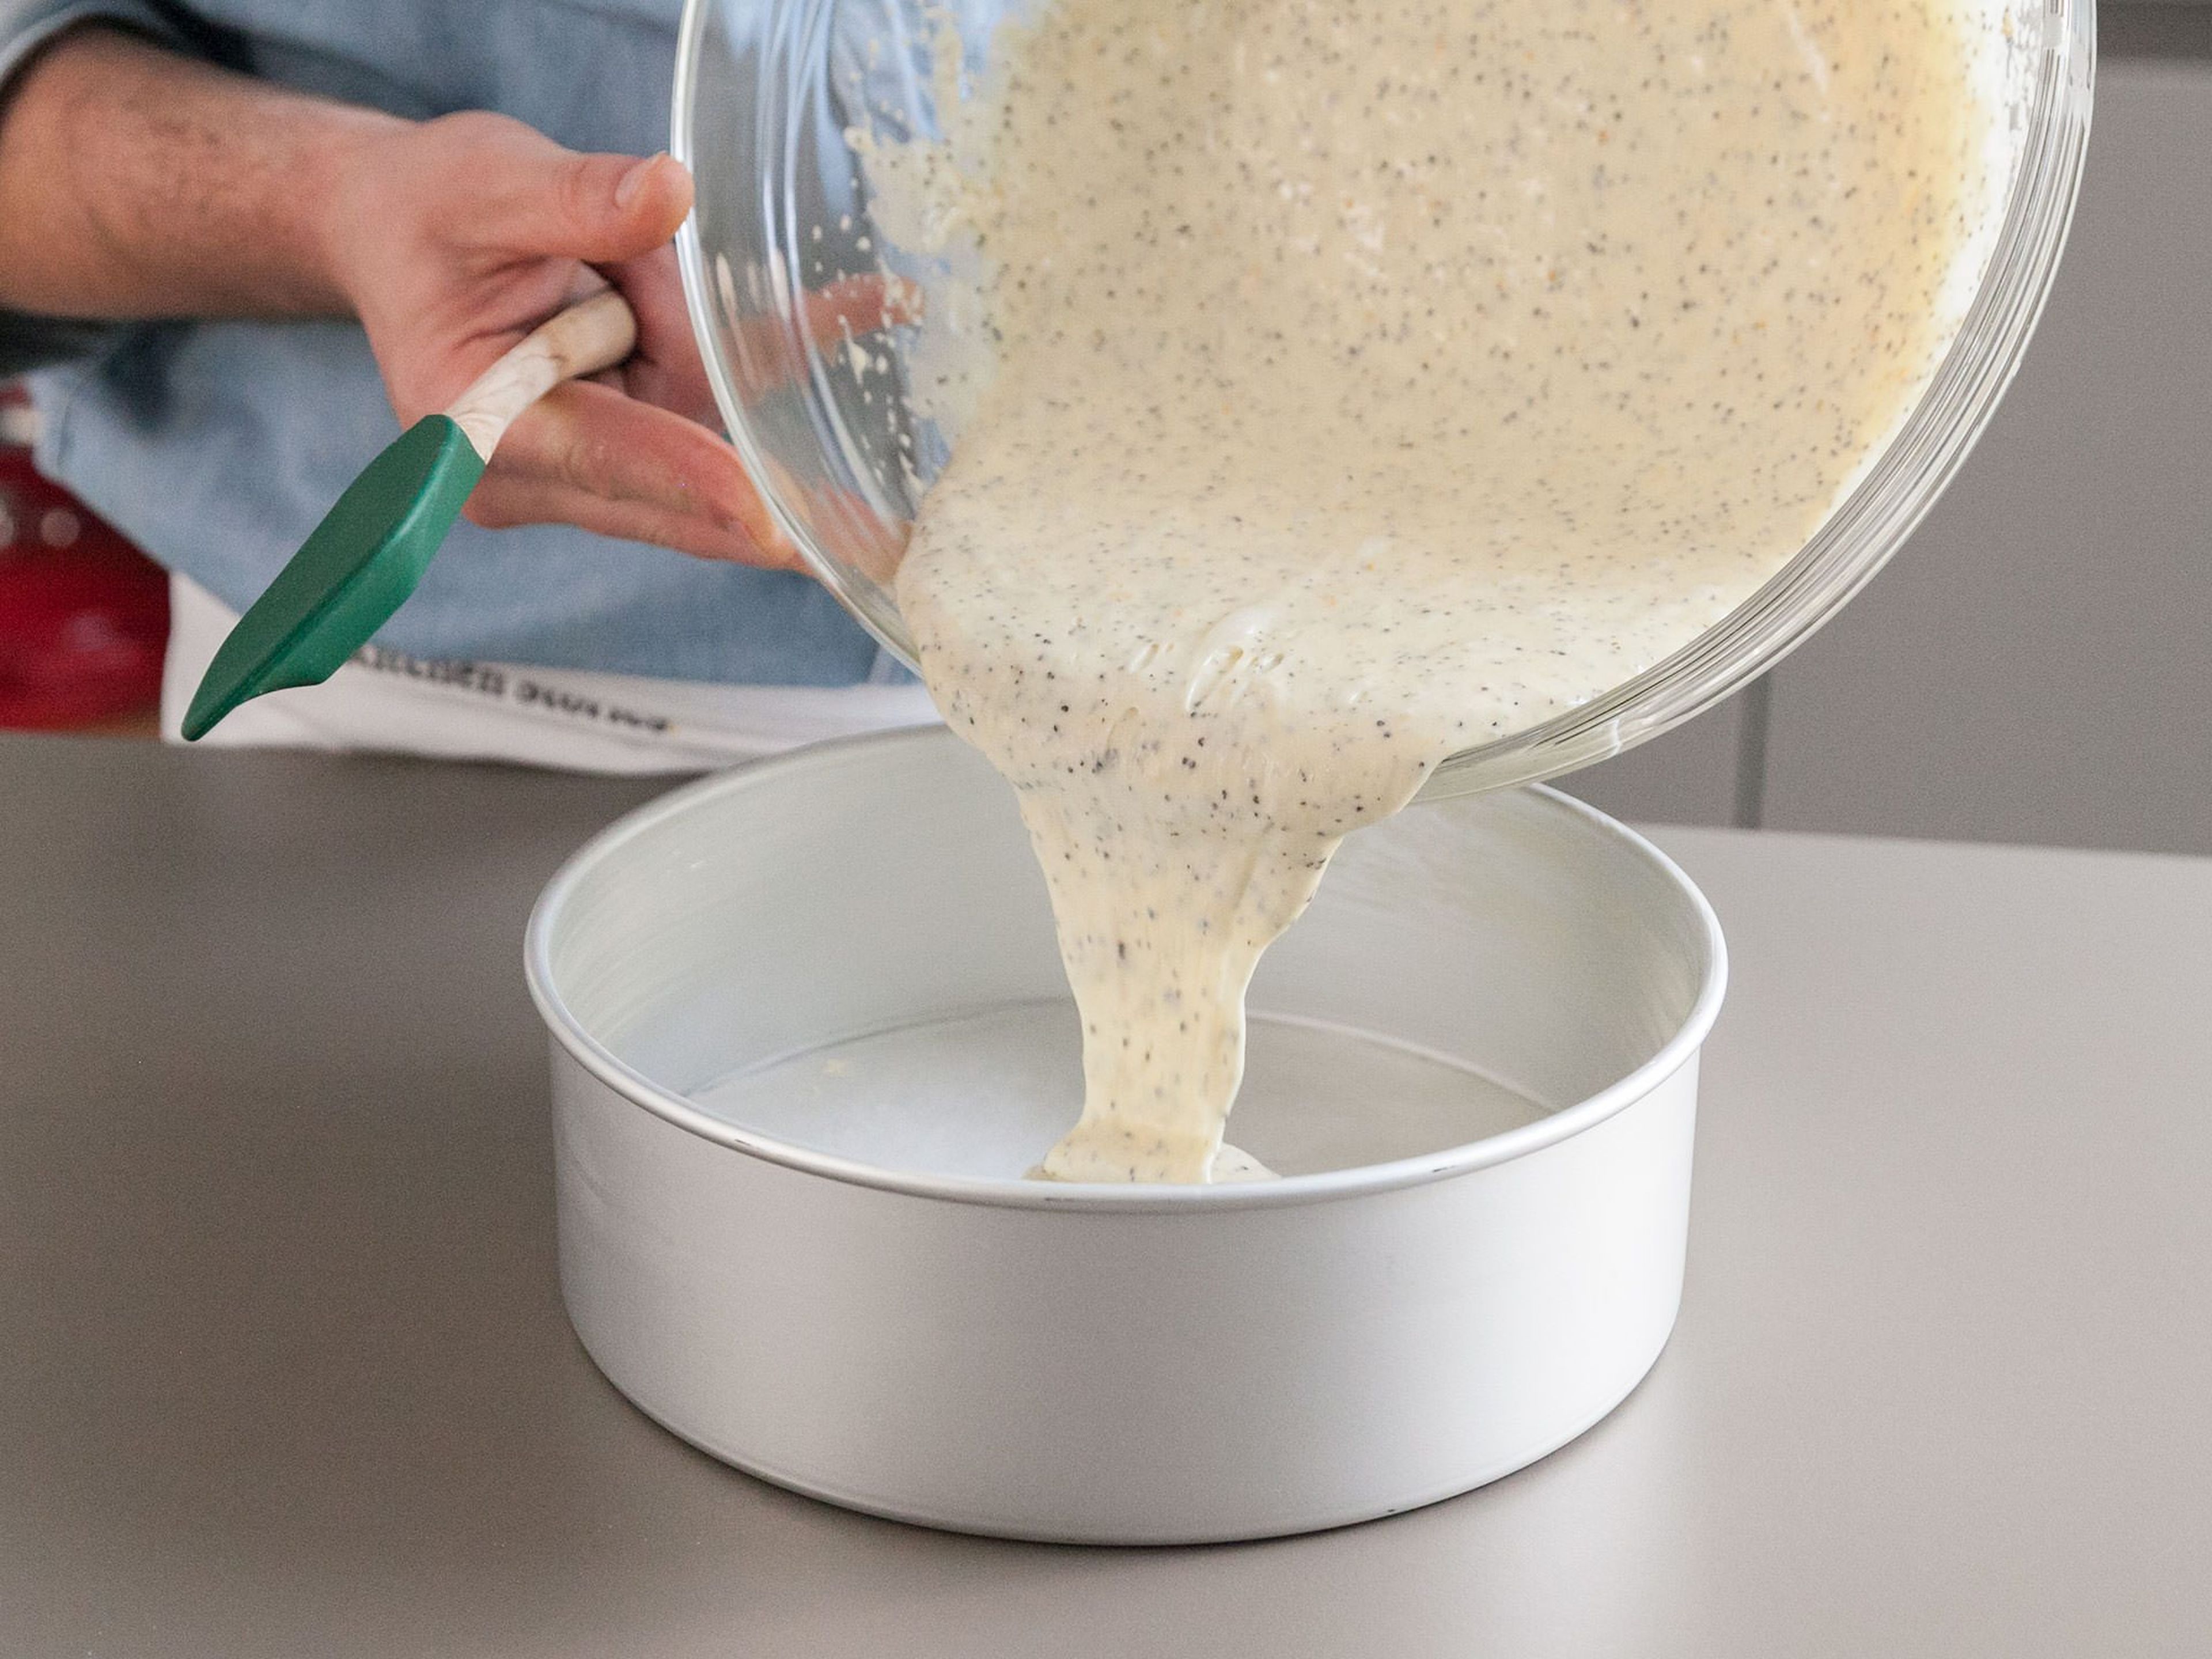 Add cake batter to baking pan. Place in oven for approx. 40 min., or until a toothpick inserted into the center of the cake comes out with a few moist crumbs. Remove from oven and place on a wire rack to cool.